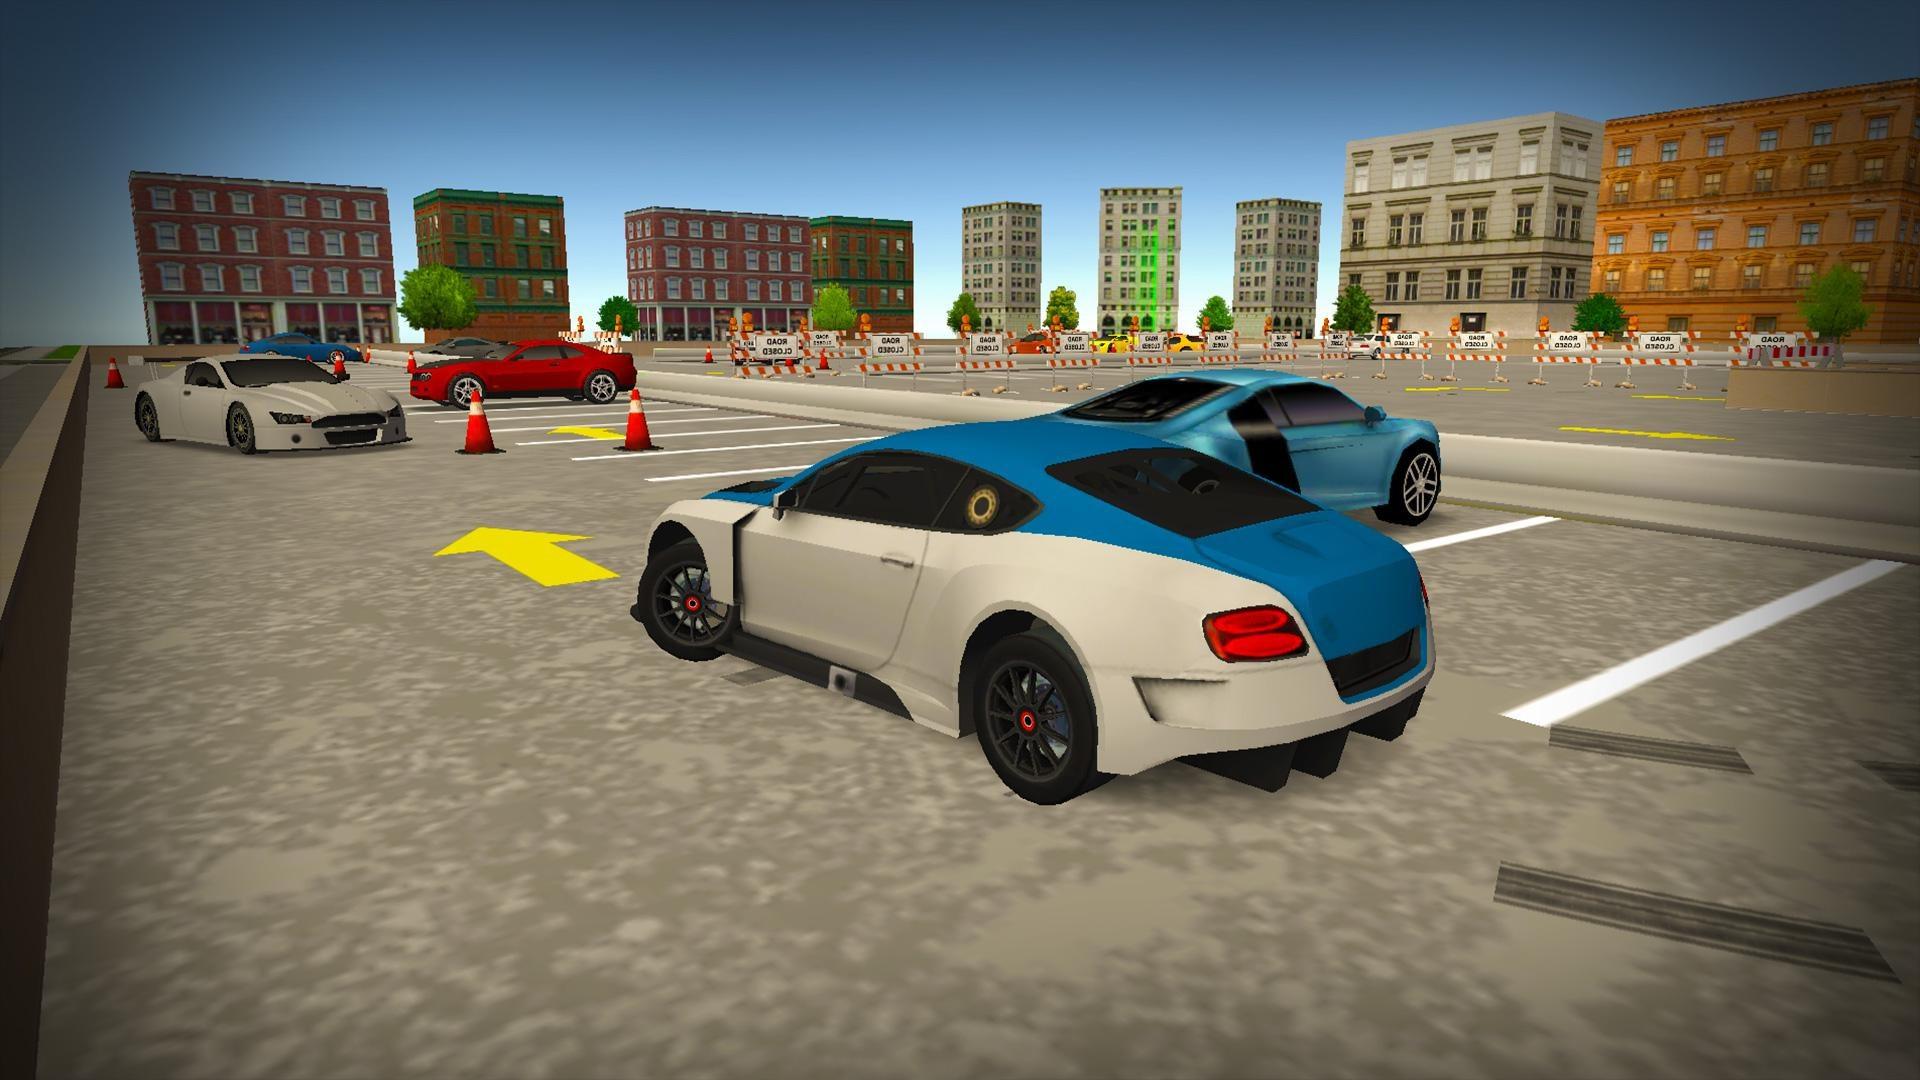 Download Car Race 3D: Car Racing on PC with MEmu